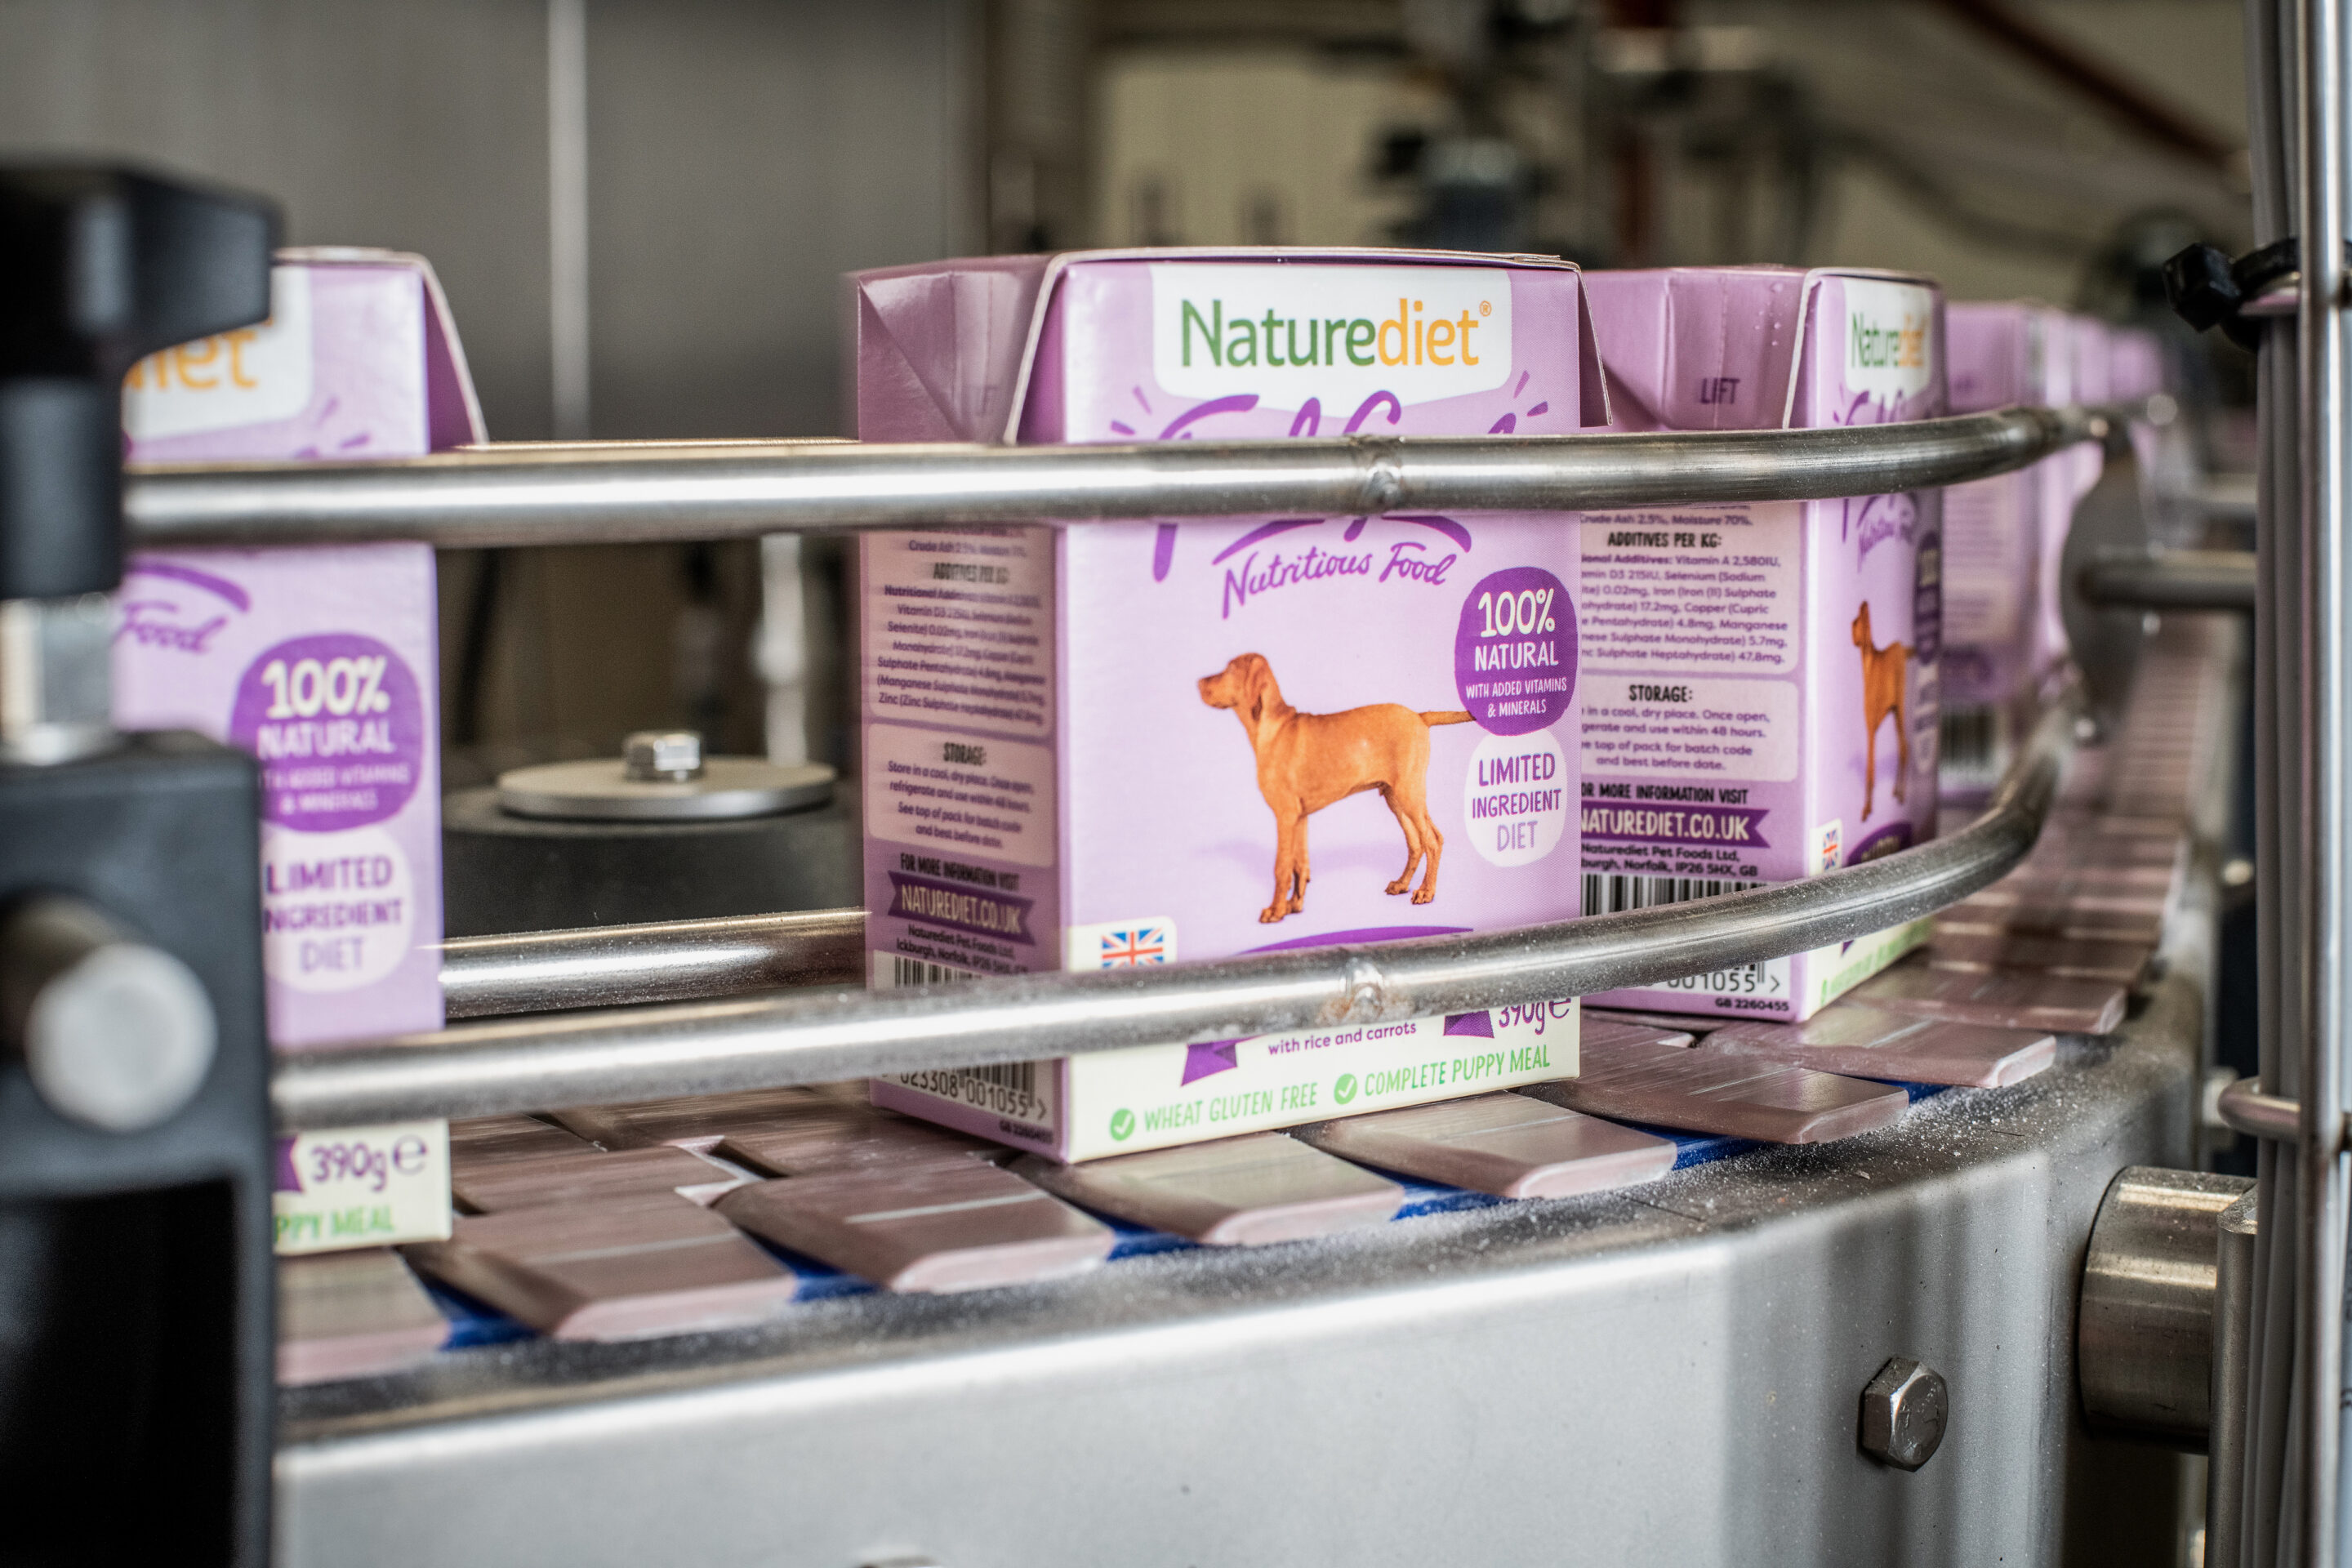 How is Naturediet dog food made?